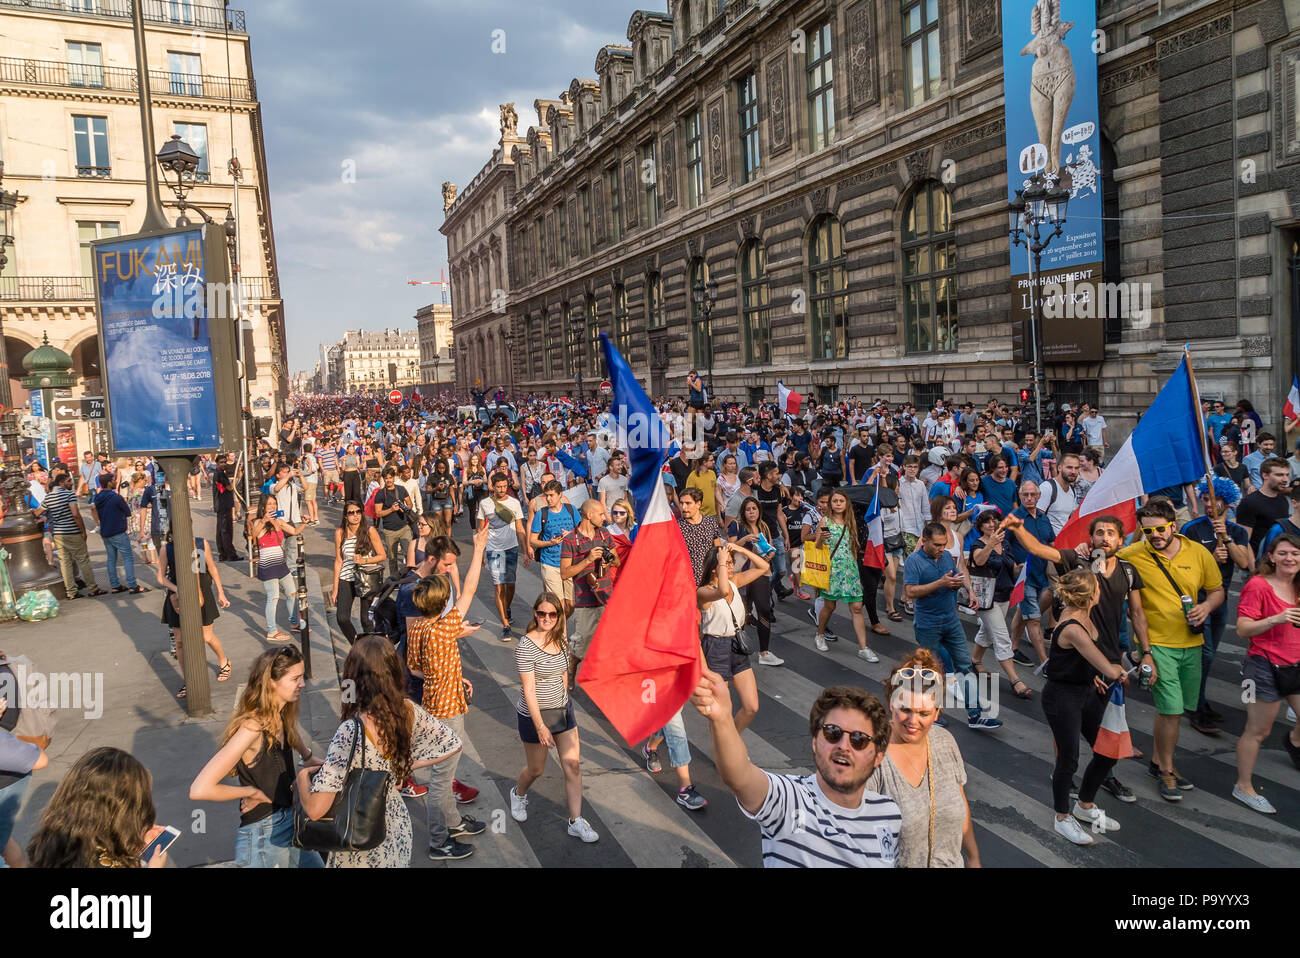 Crowd in Rue de Rivoli in Paris going to the Champs Elysees atfer the 2018 World Cup Final Game Stock Photo